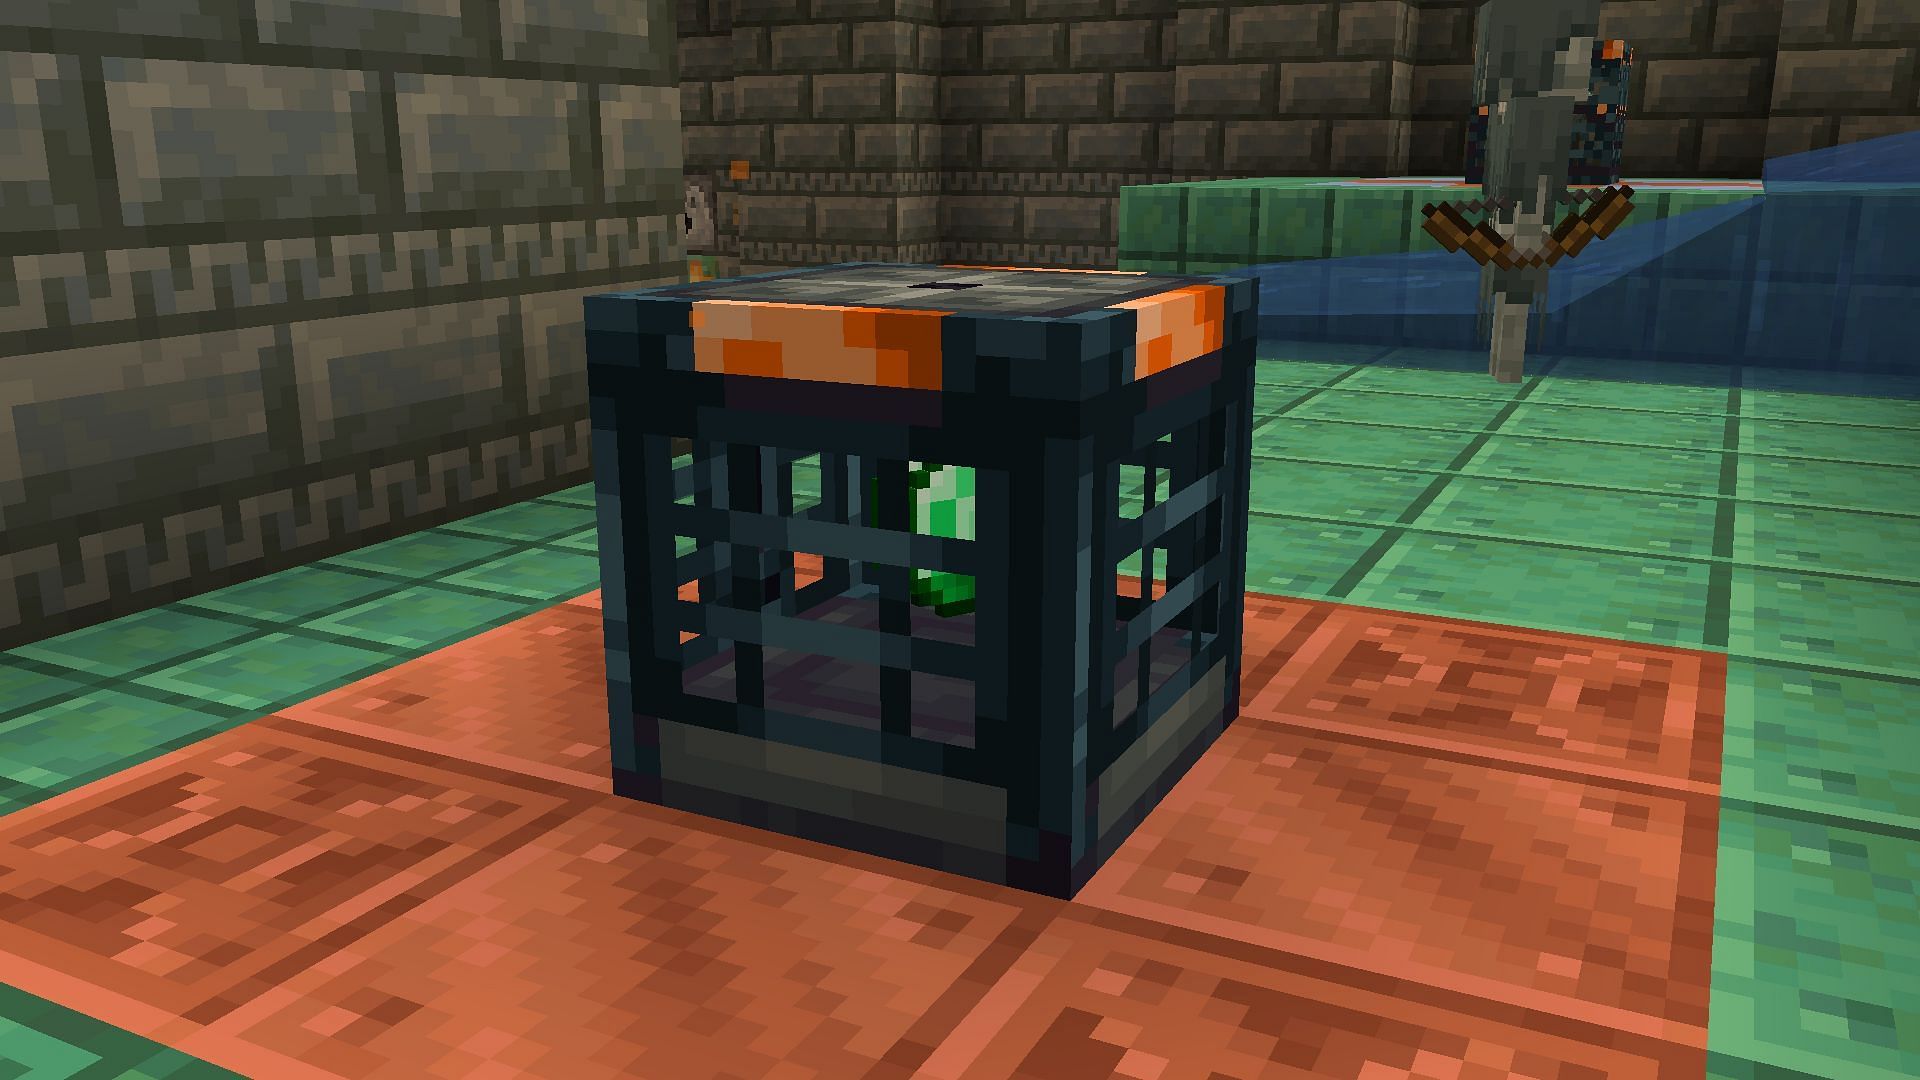 A vault block in the trial chambers (Image via Mojang)